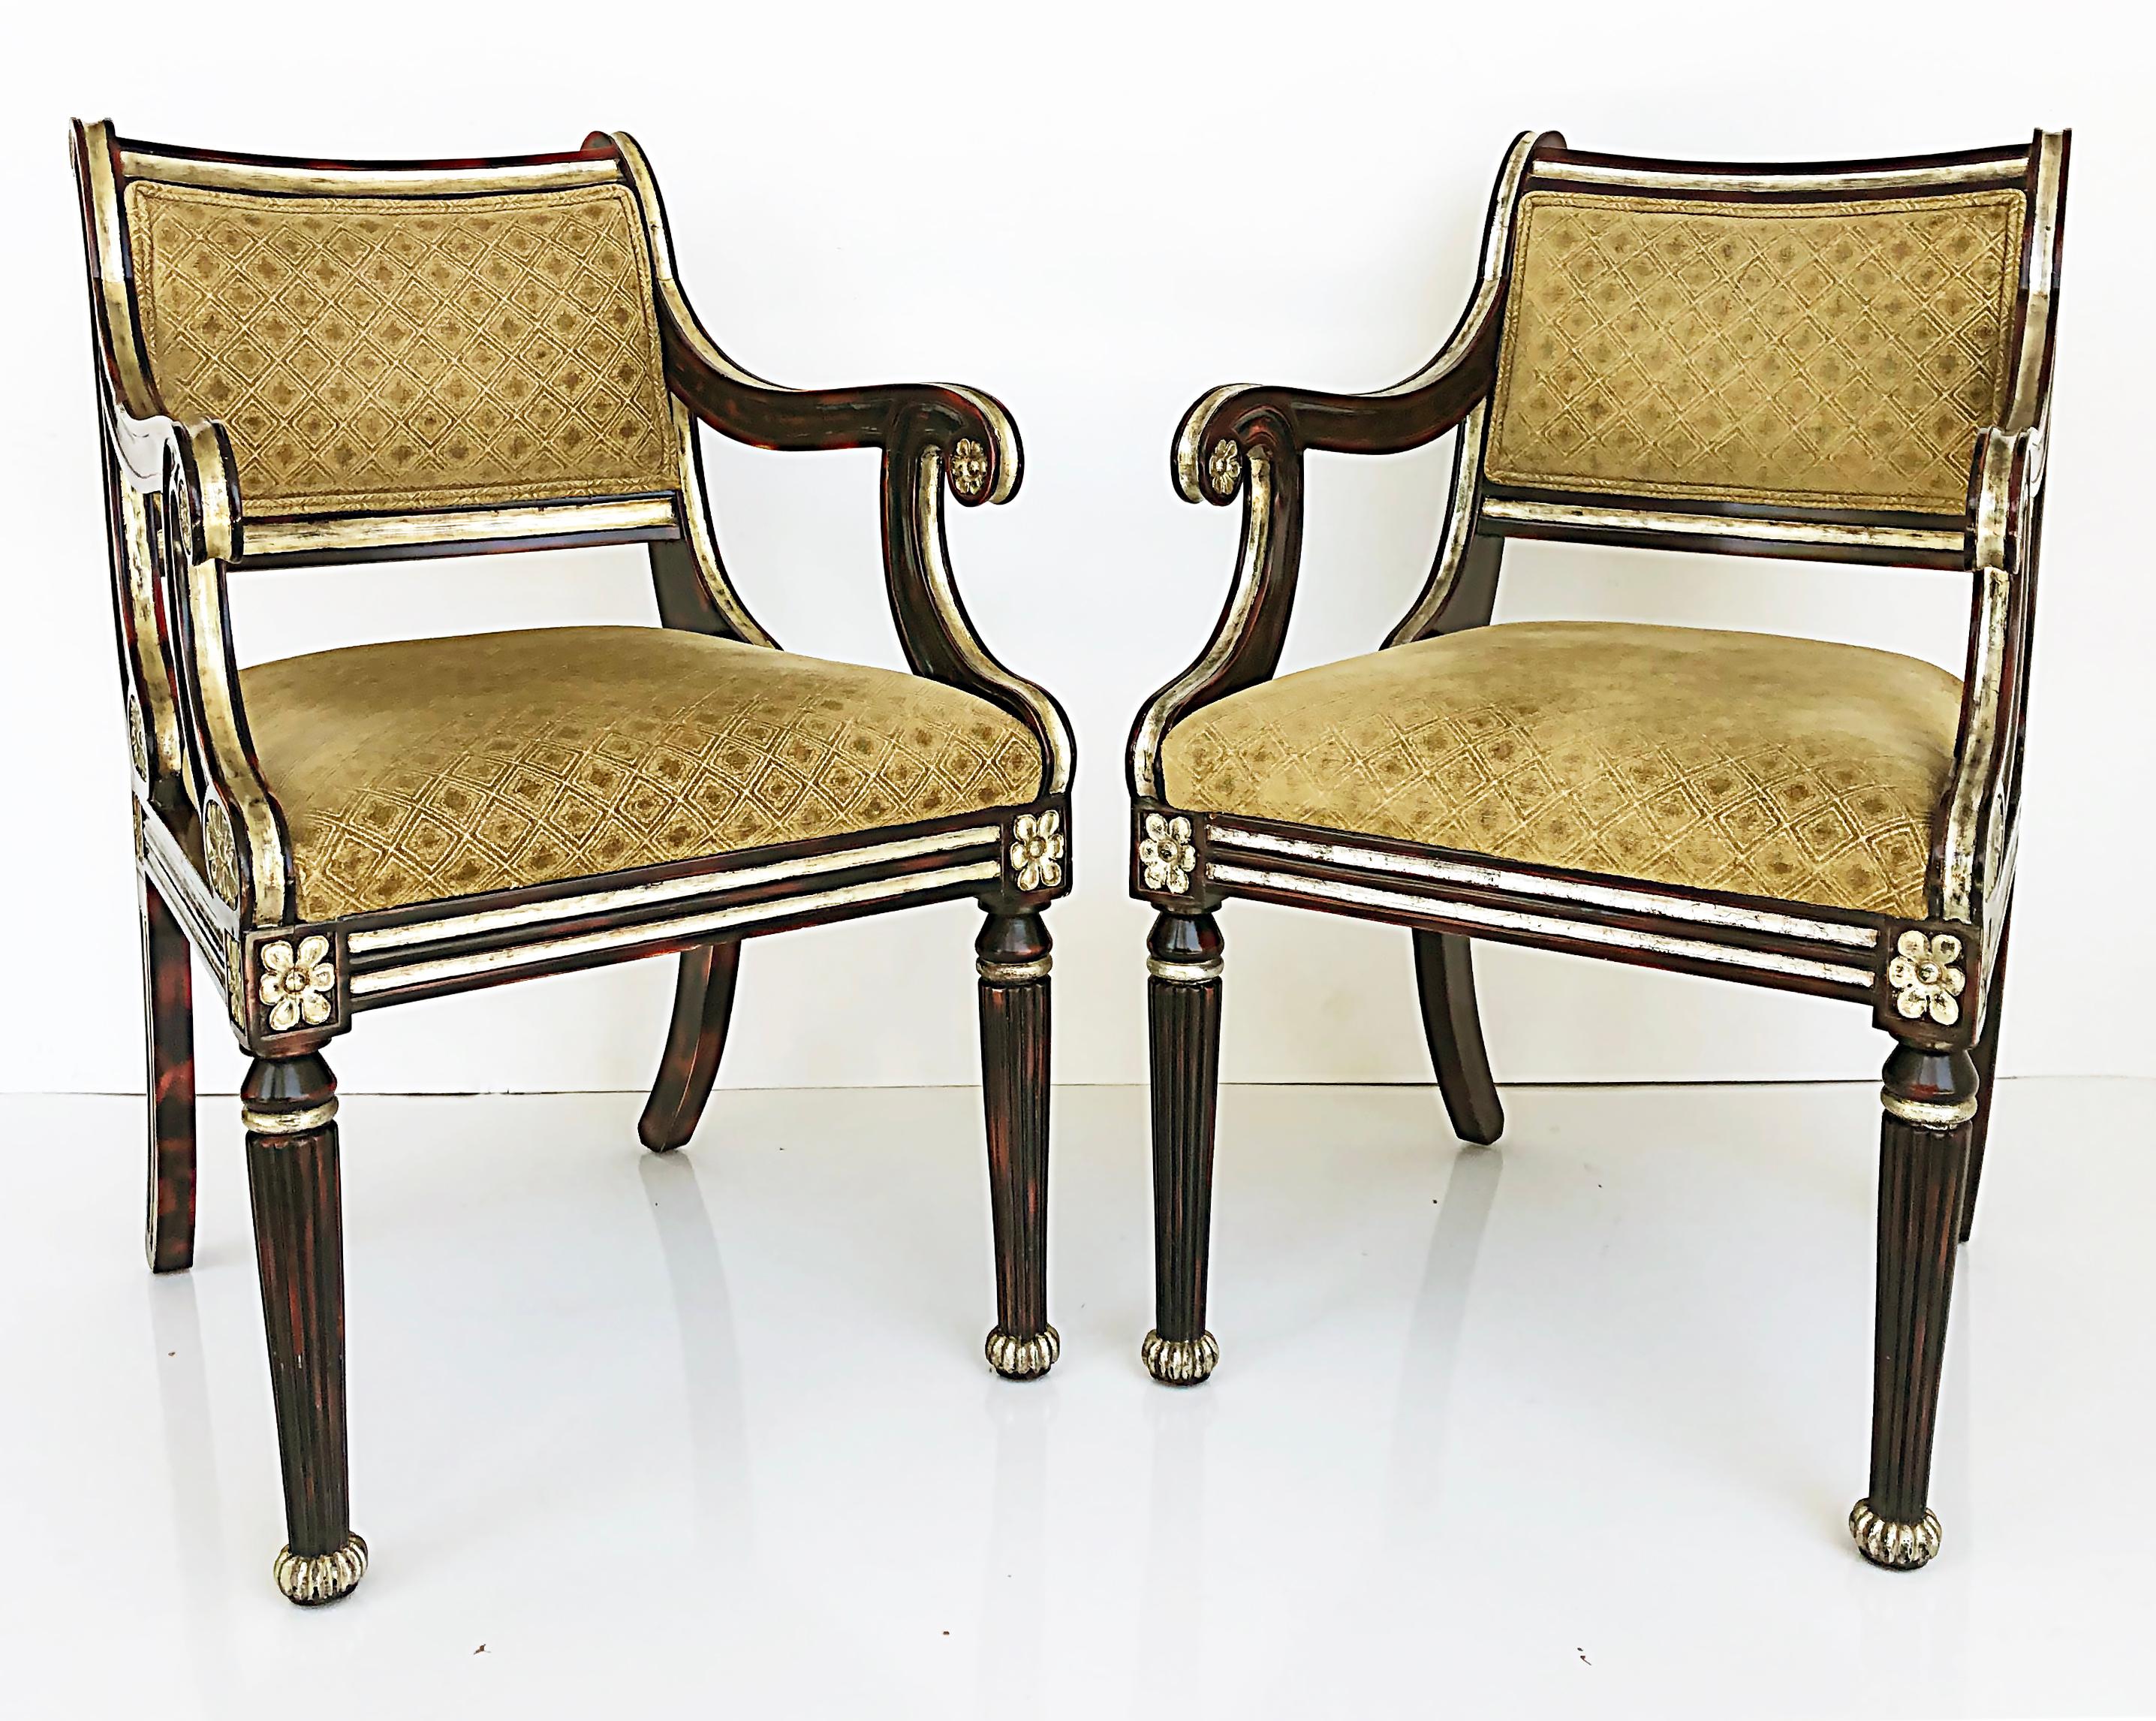 J. Robert Scott mahogany and silver leaf arm chairs, pair.

Offered for sale is an elegant pair of J. Robert Scott Mahogany and silver leaf armchairs created in a classical style. The chairs are nicely carved and are supported by tapered ribbed